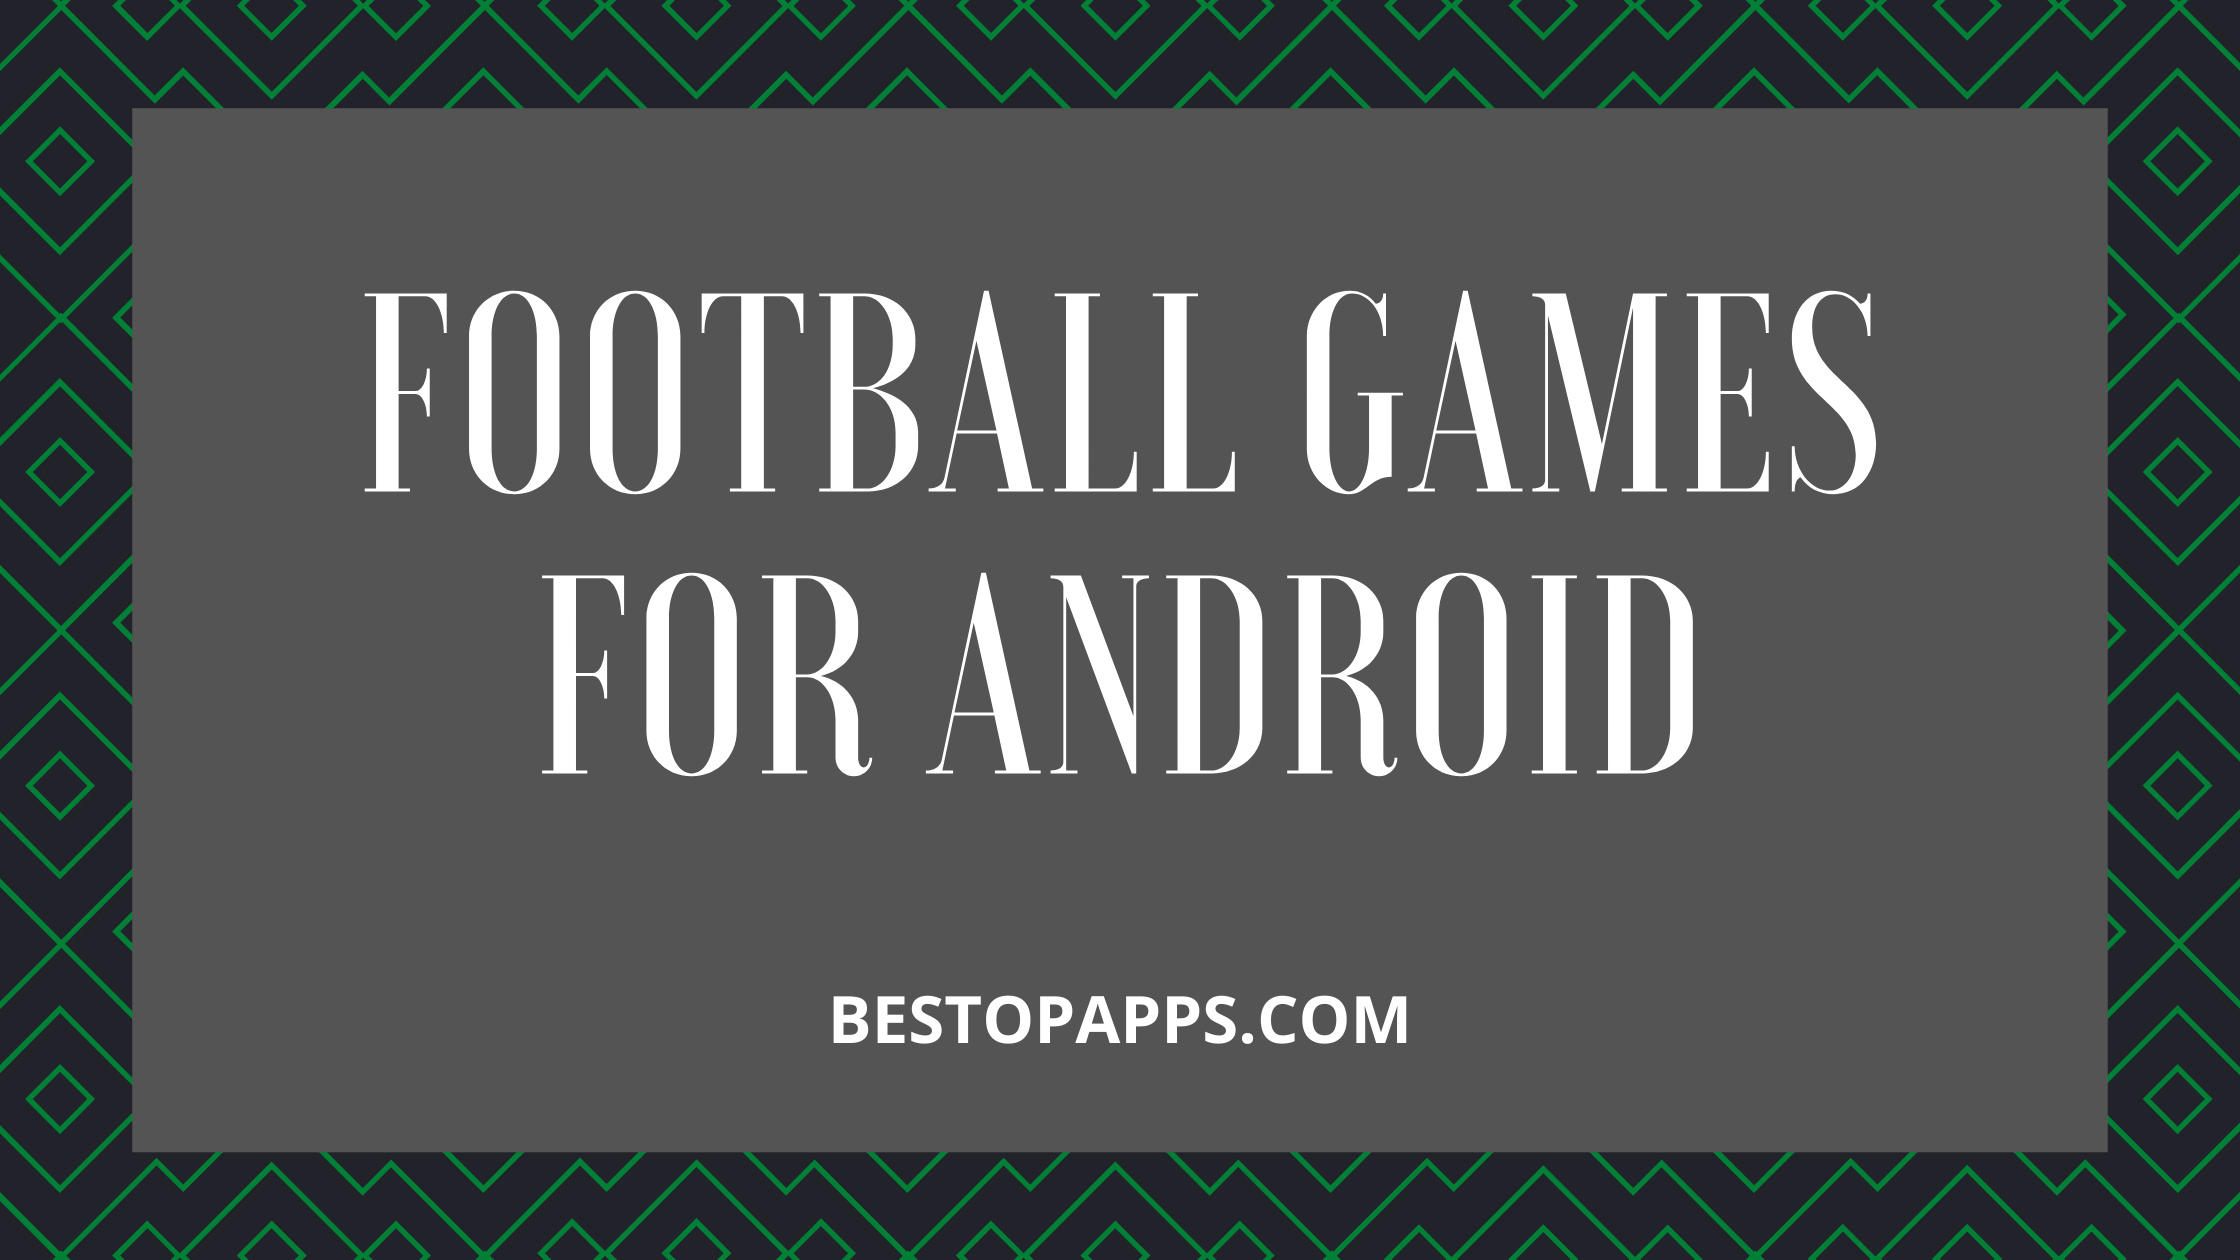 FOOTBALL GAMES FOR ANDROID